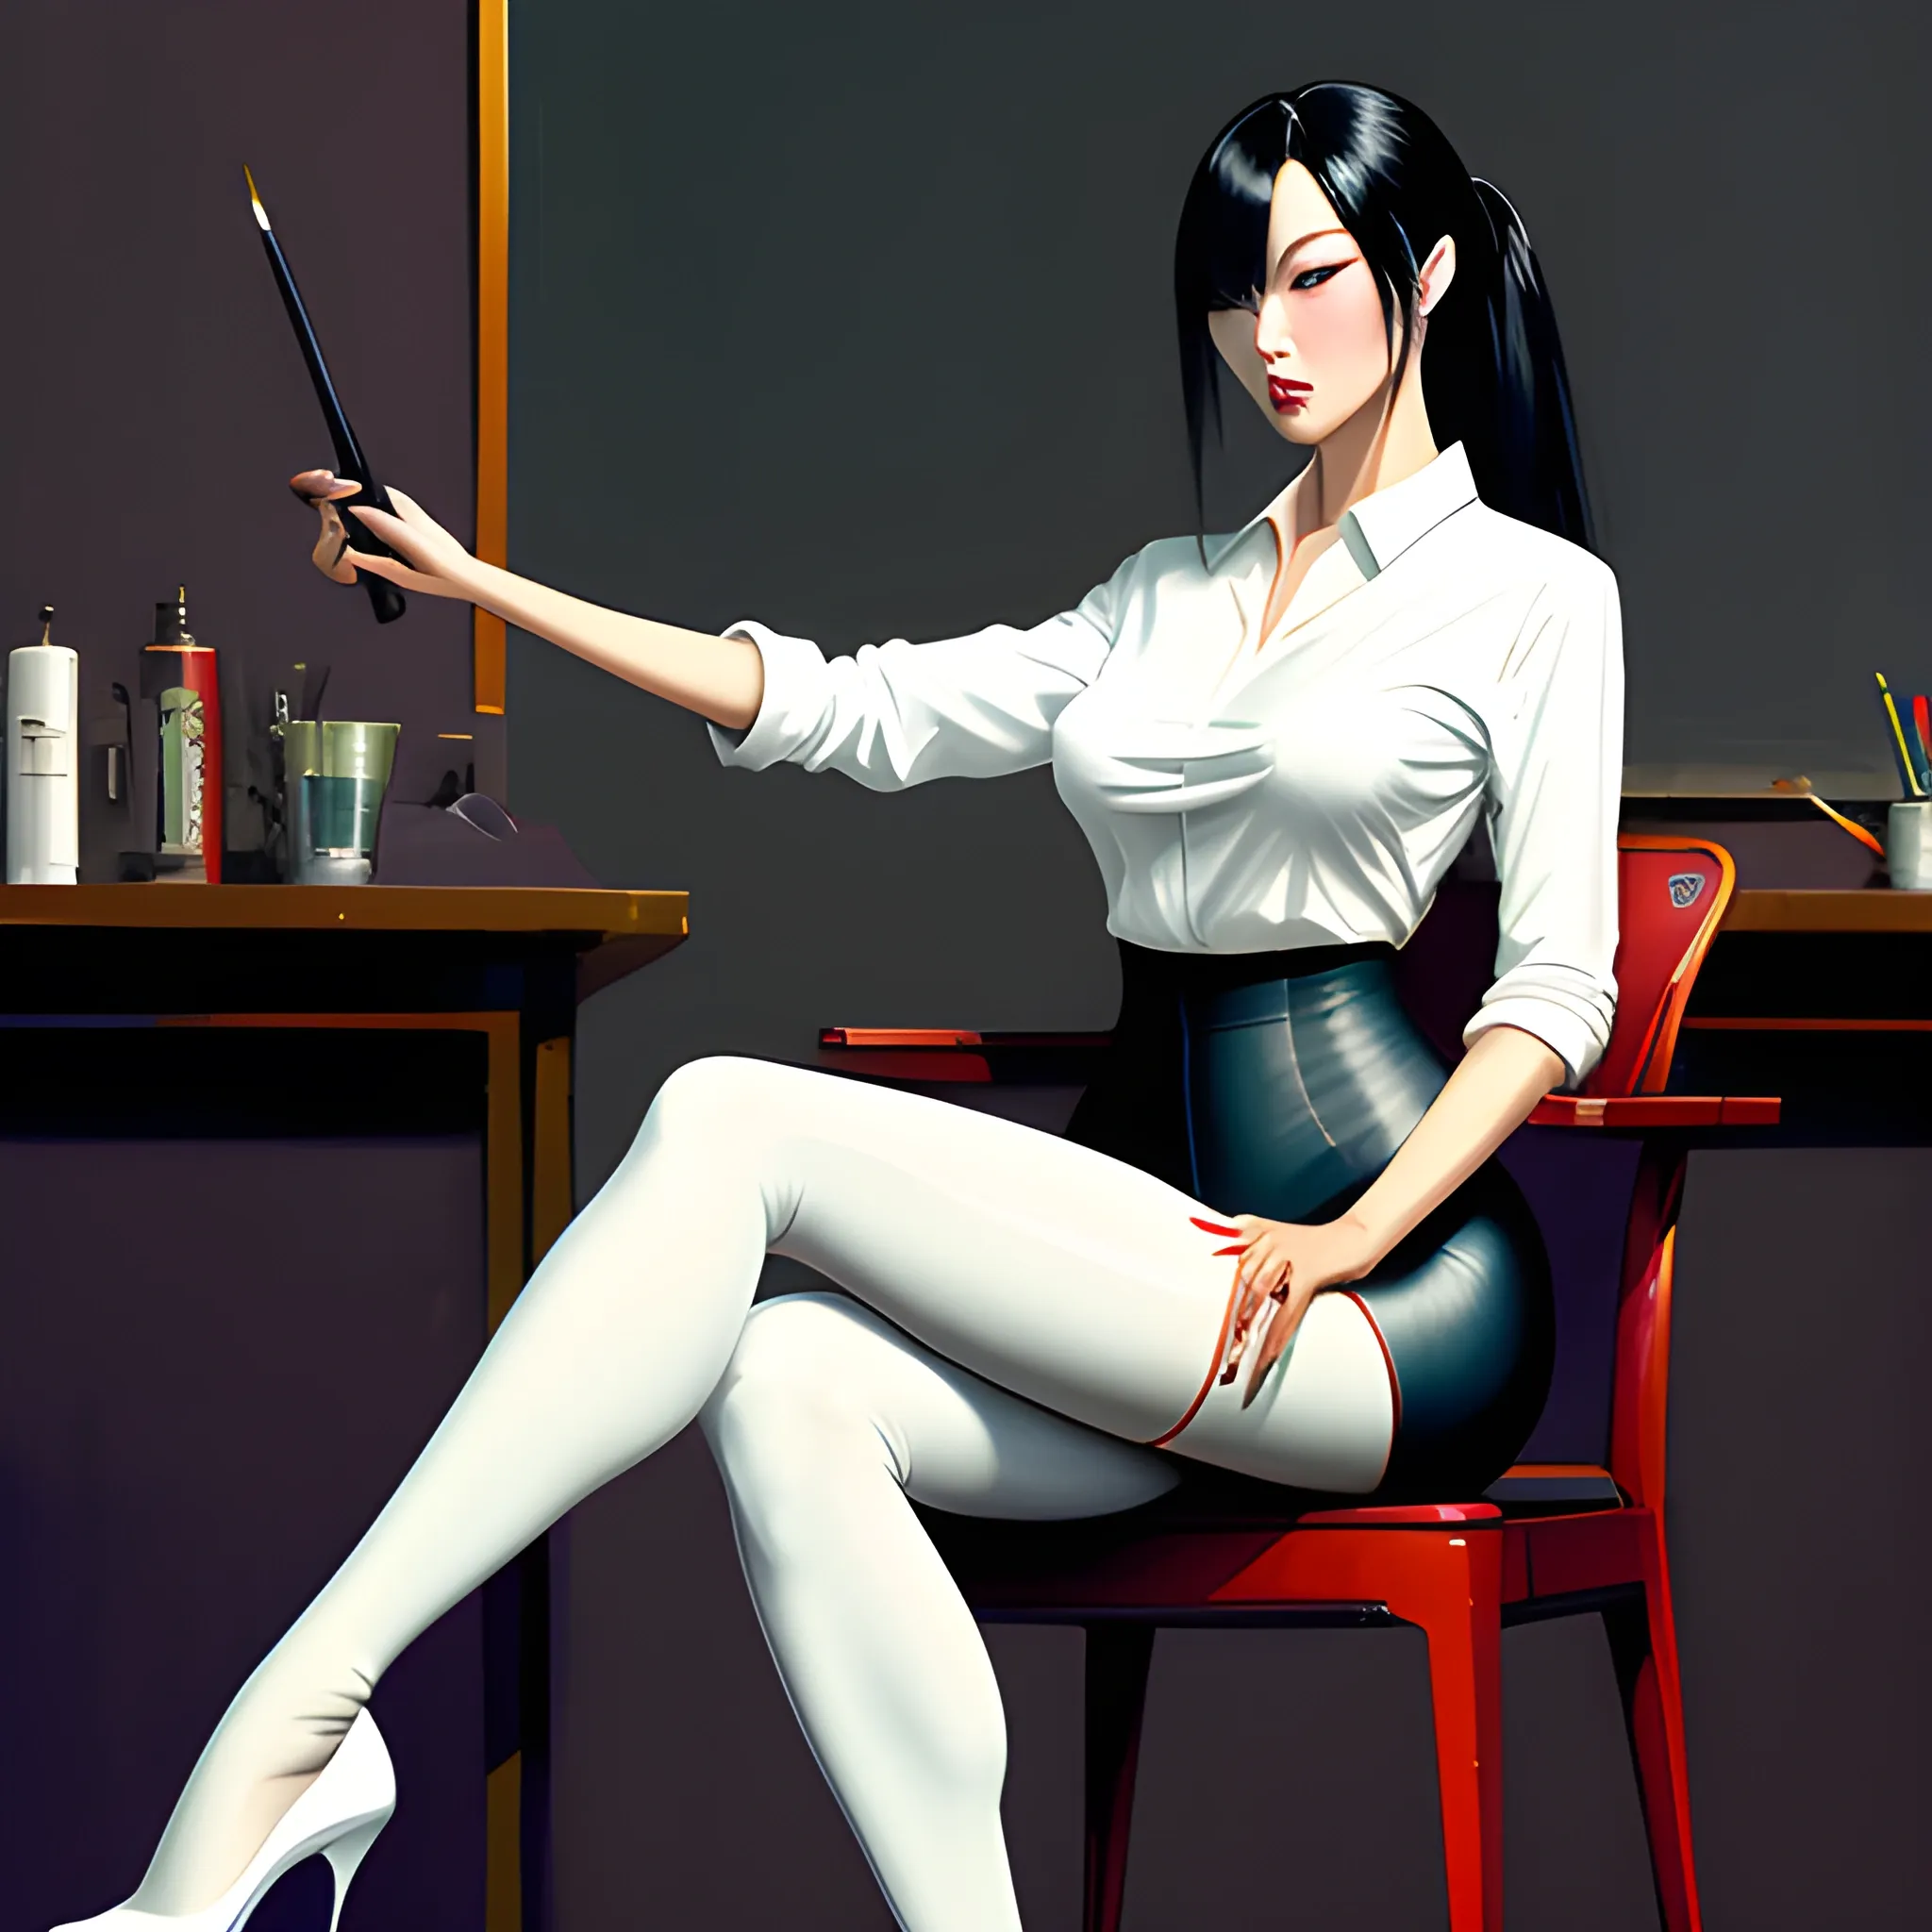 dark painting, intensive colors,  casual fashion shot of   korean cheap damsel in distress, wearing tights , cameltoe, longhaired, symmetric face, manga eyes,  full figure, fit,  tight white shirt, legs, knees, high heels, sitting on the chair in the class, school, revenge, sinister art by Greg Rutkowski, Oil Painting